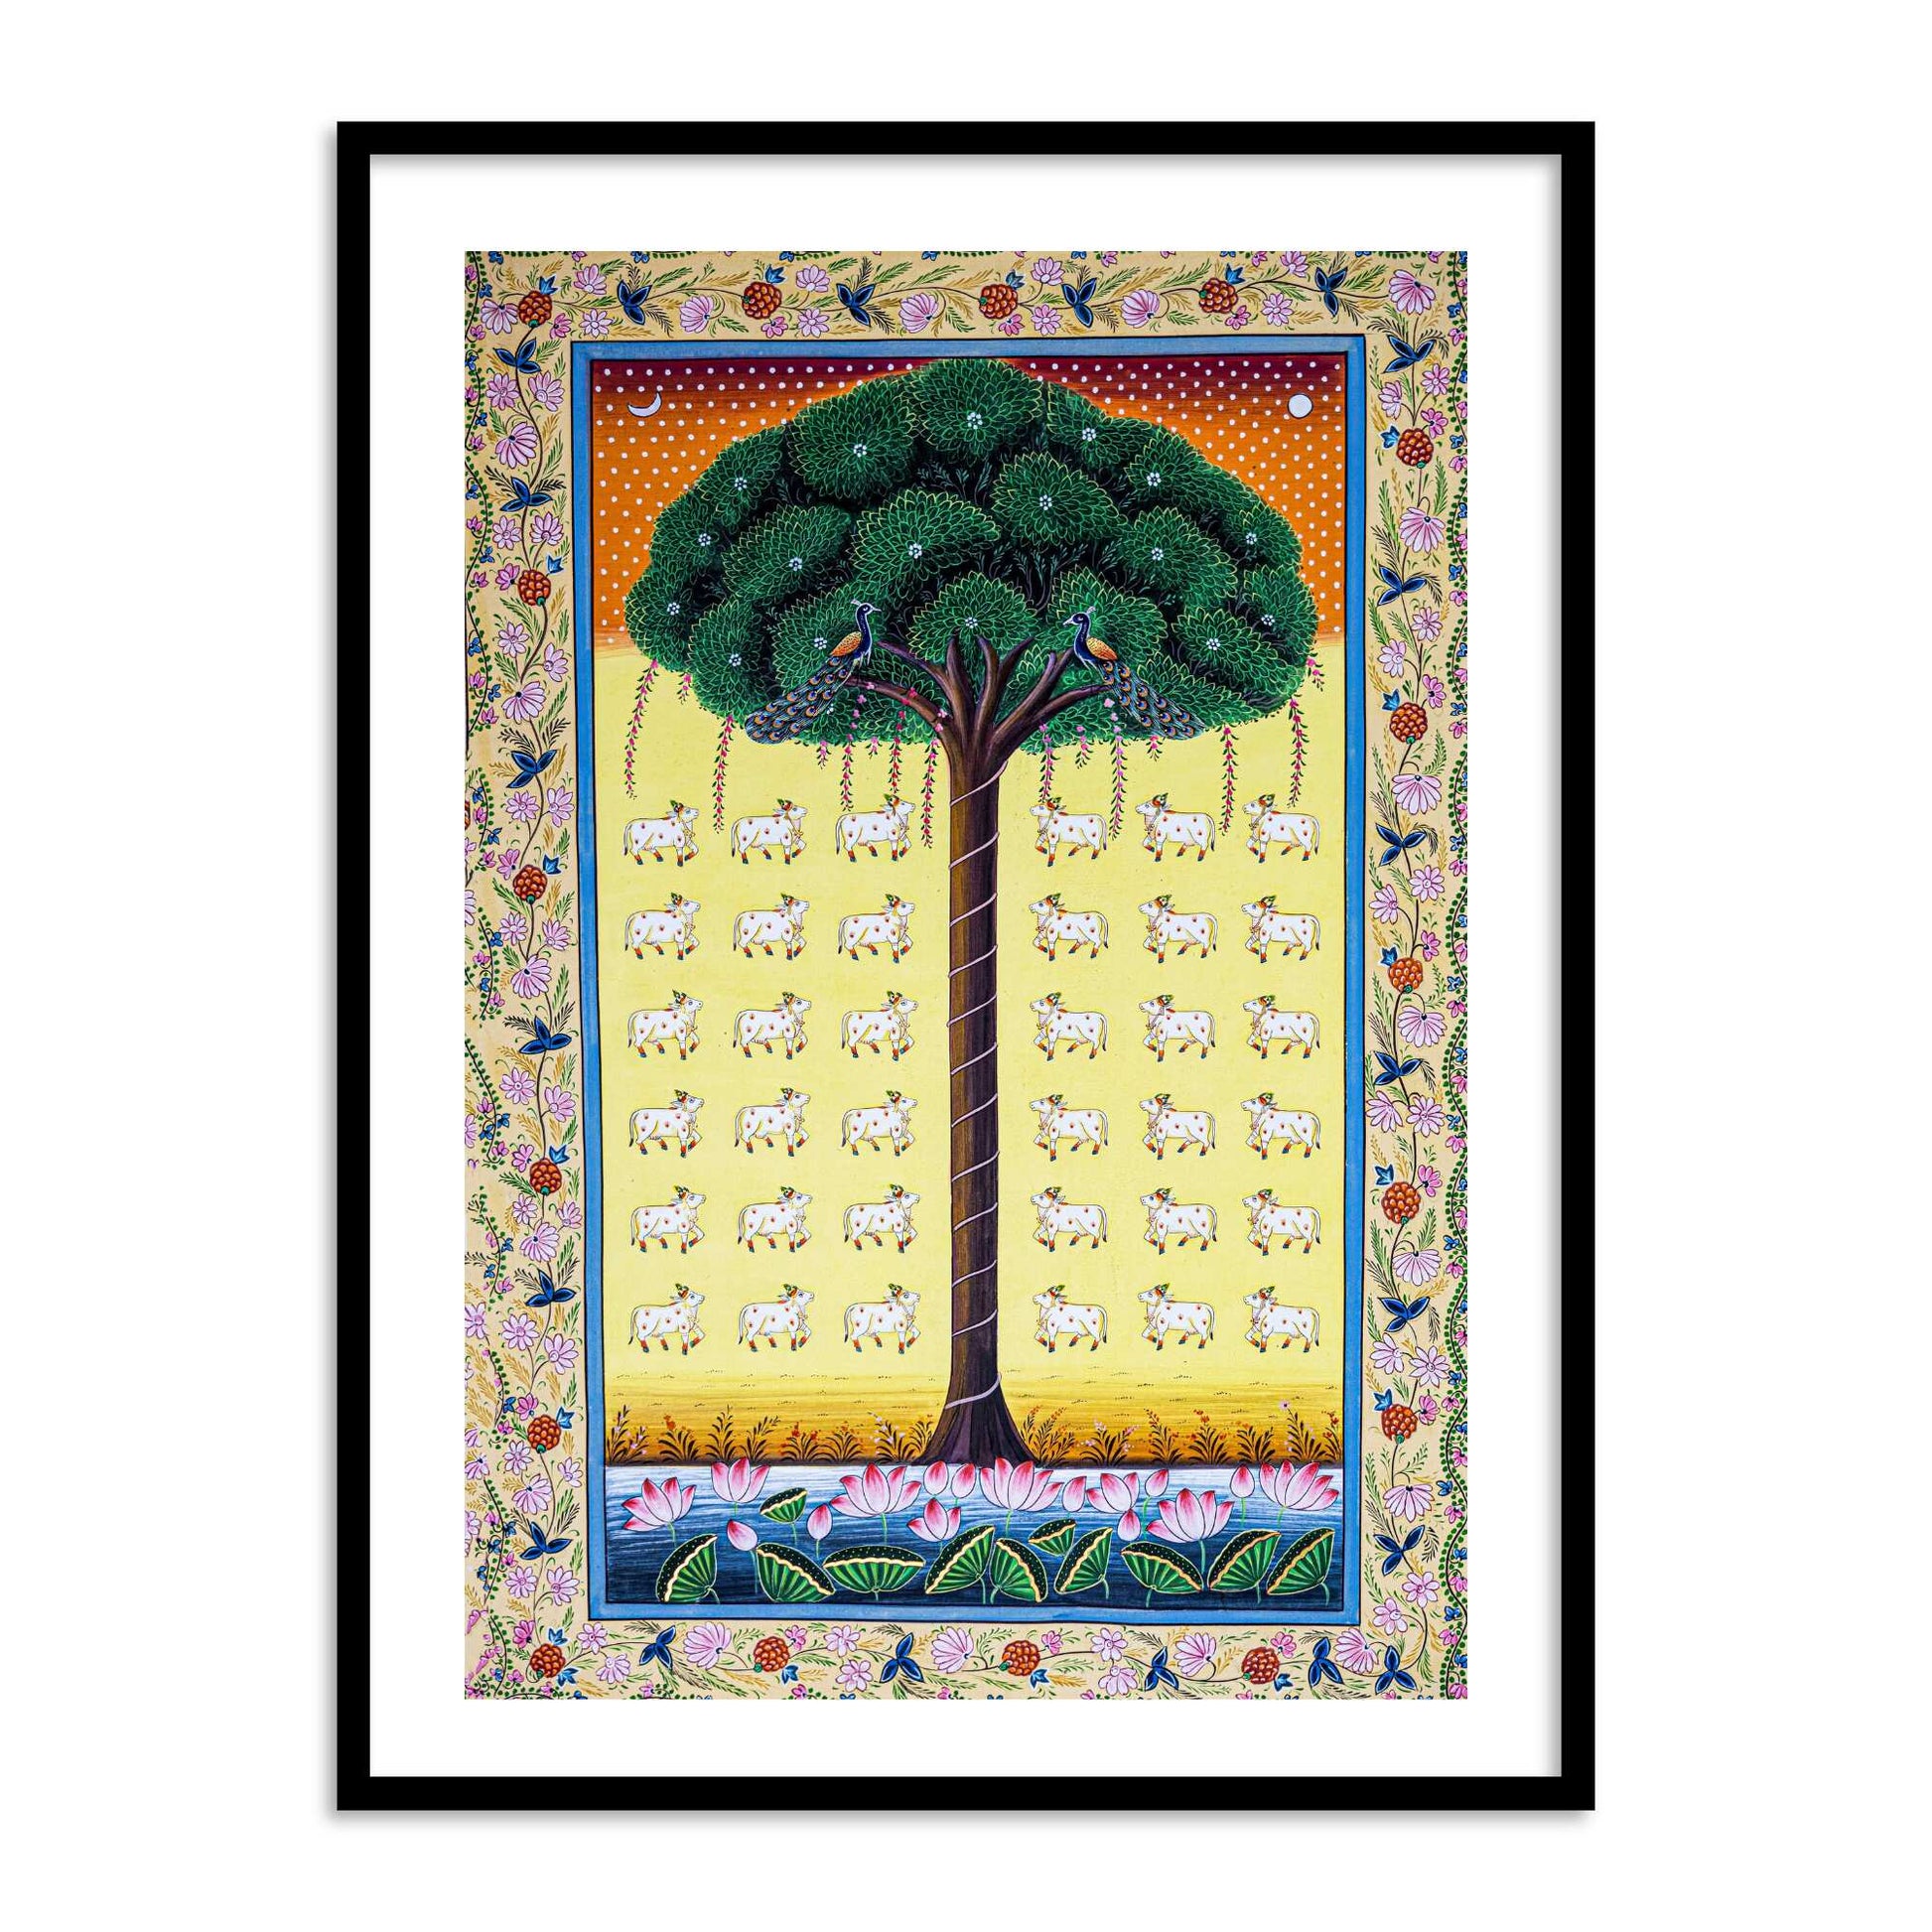 Buy Online Pichwai Tree of Life Pichwai Painting | Phad Indian Art for Wall Decor